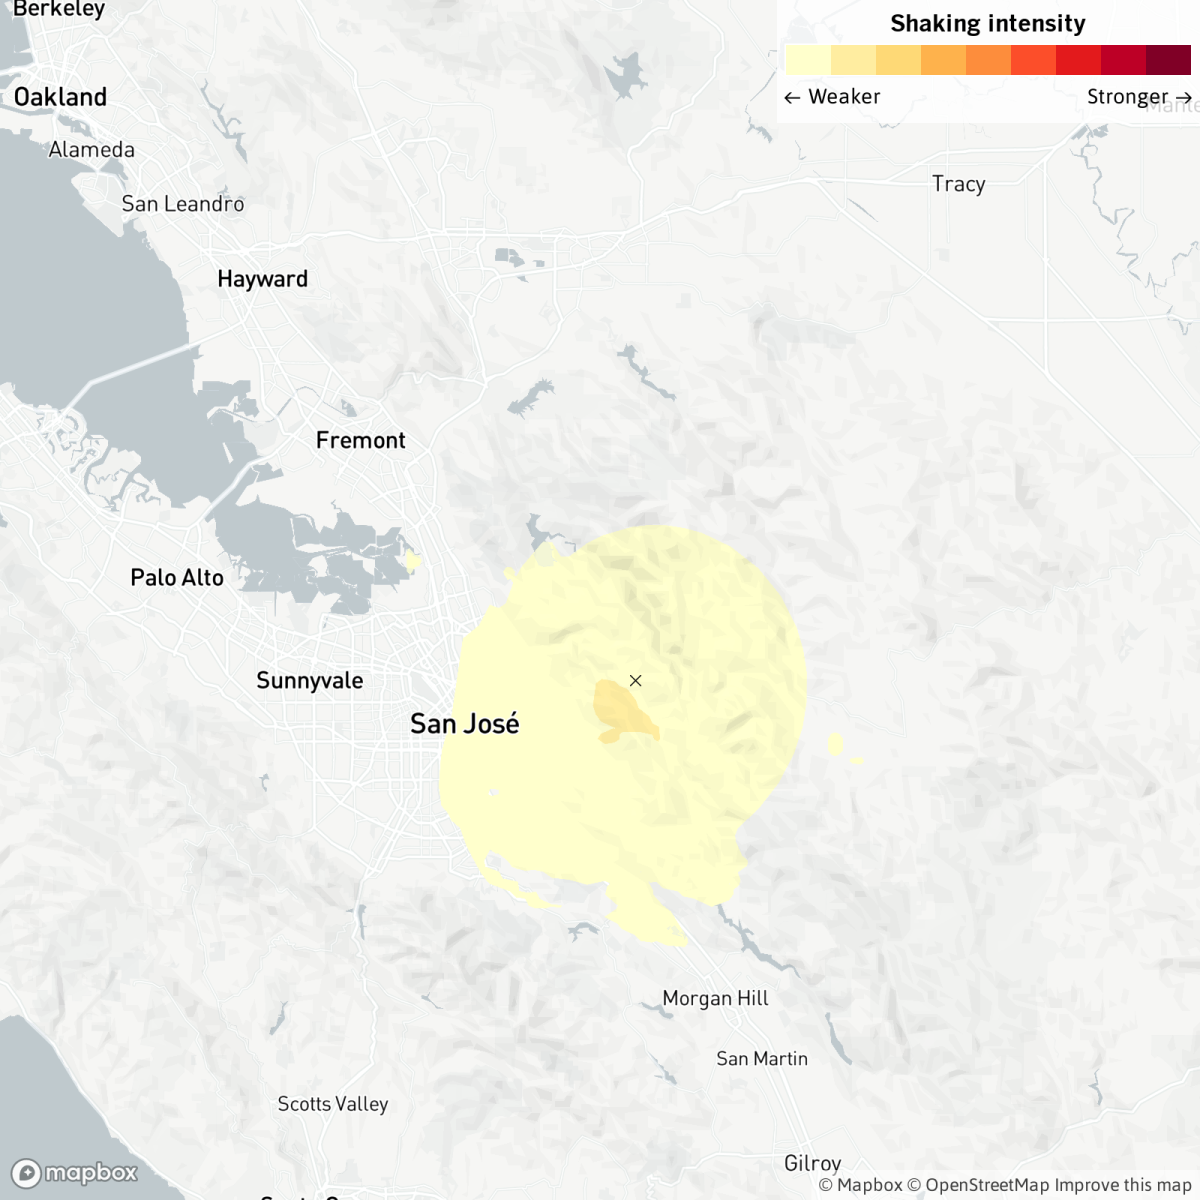 Thursday morning’s earthquake struck one mile from San Jose.